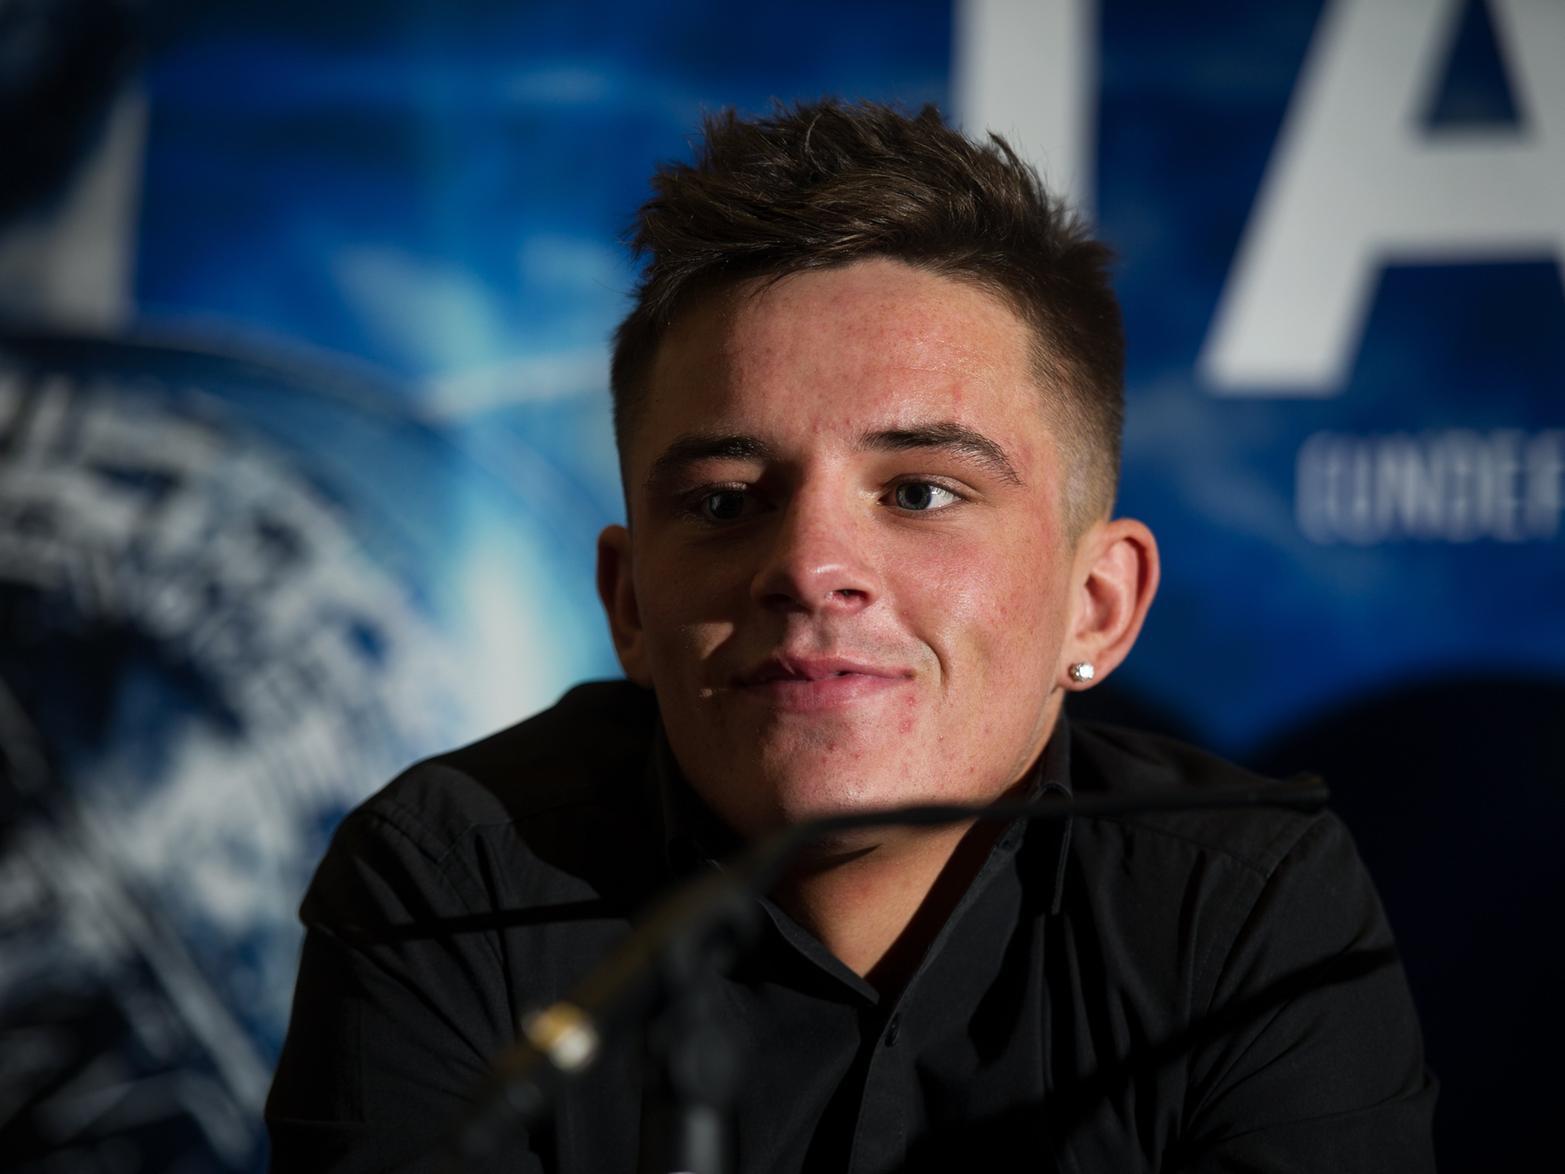 The 23 year old boxer from Saughton burst onto the national stage in November after adding the British bantamweight title to his Commonwealth belt.